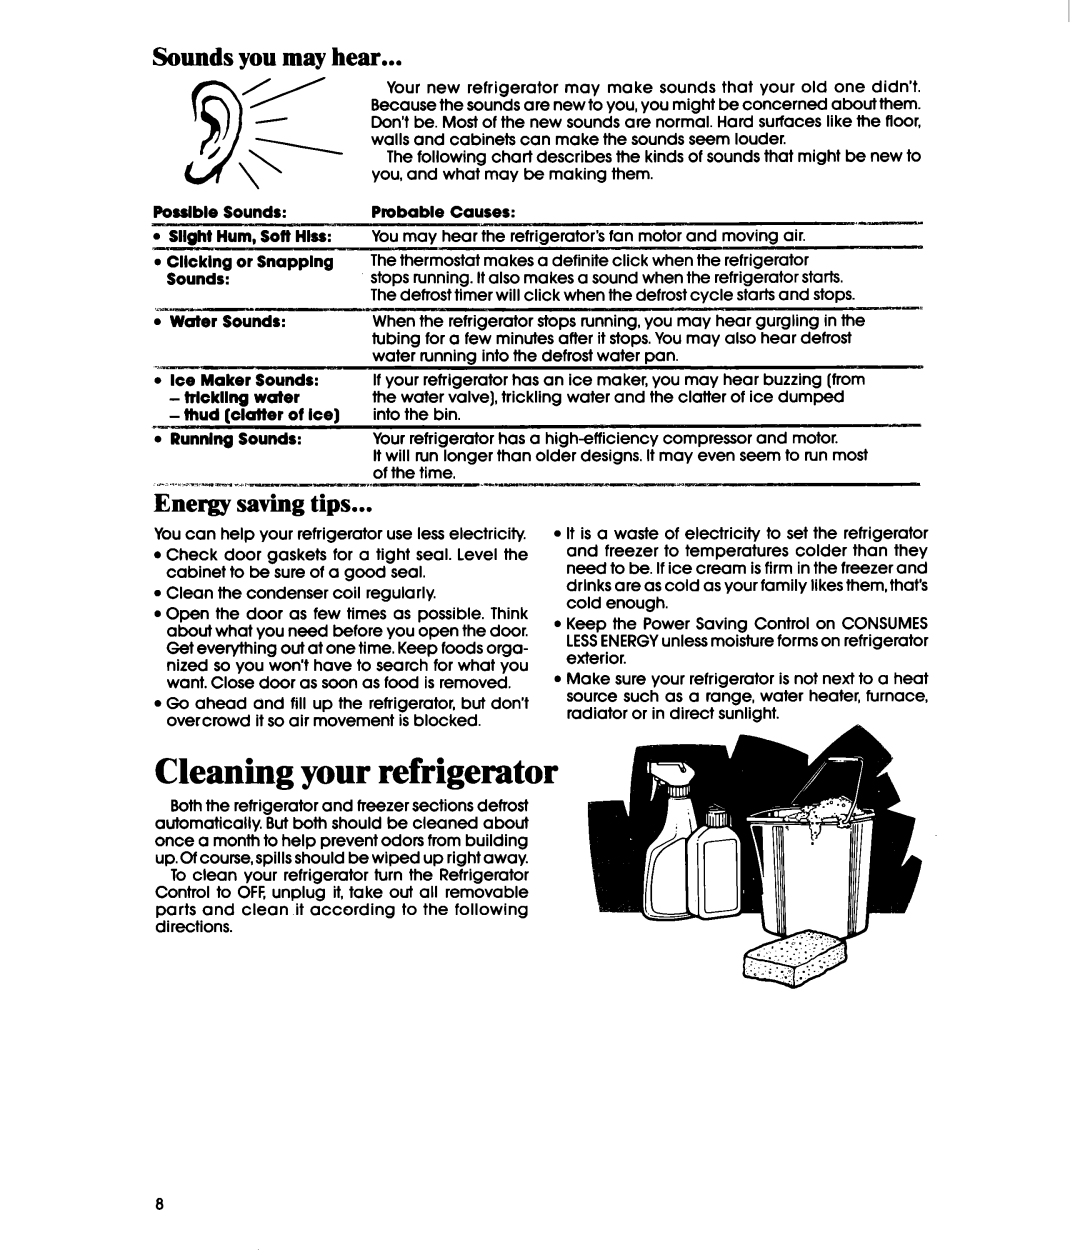 Whirlpool ETZOVK, ET20VM manual Cleaning your refrigerator, Sounds you may hear, Energy saving tips 